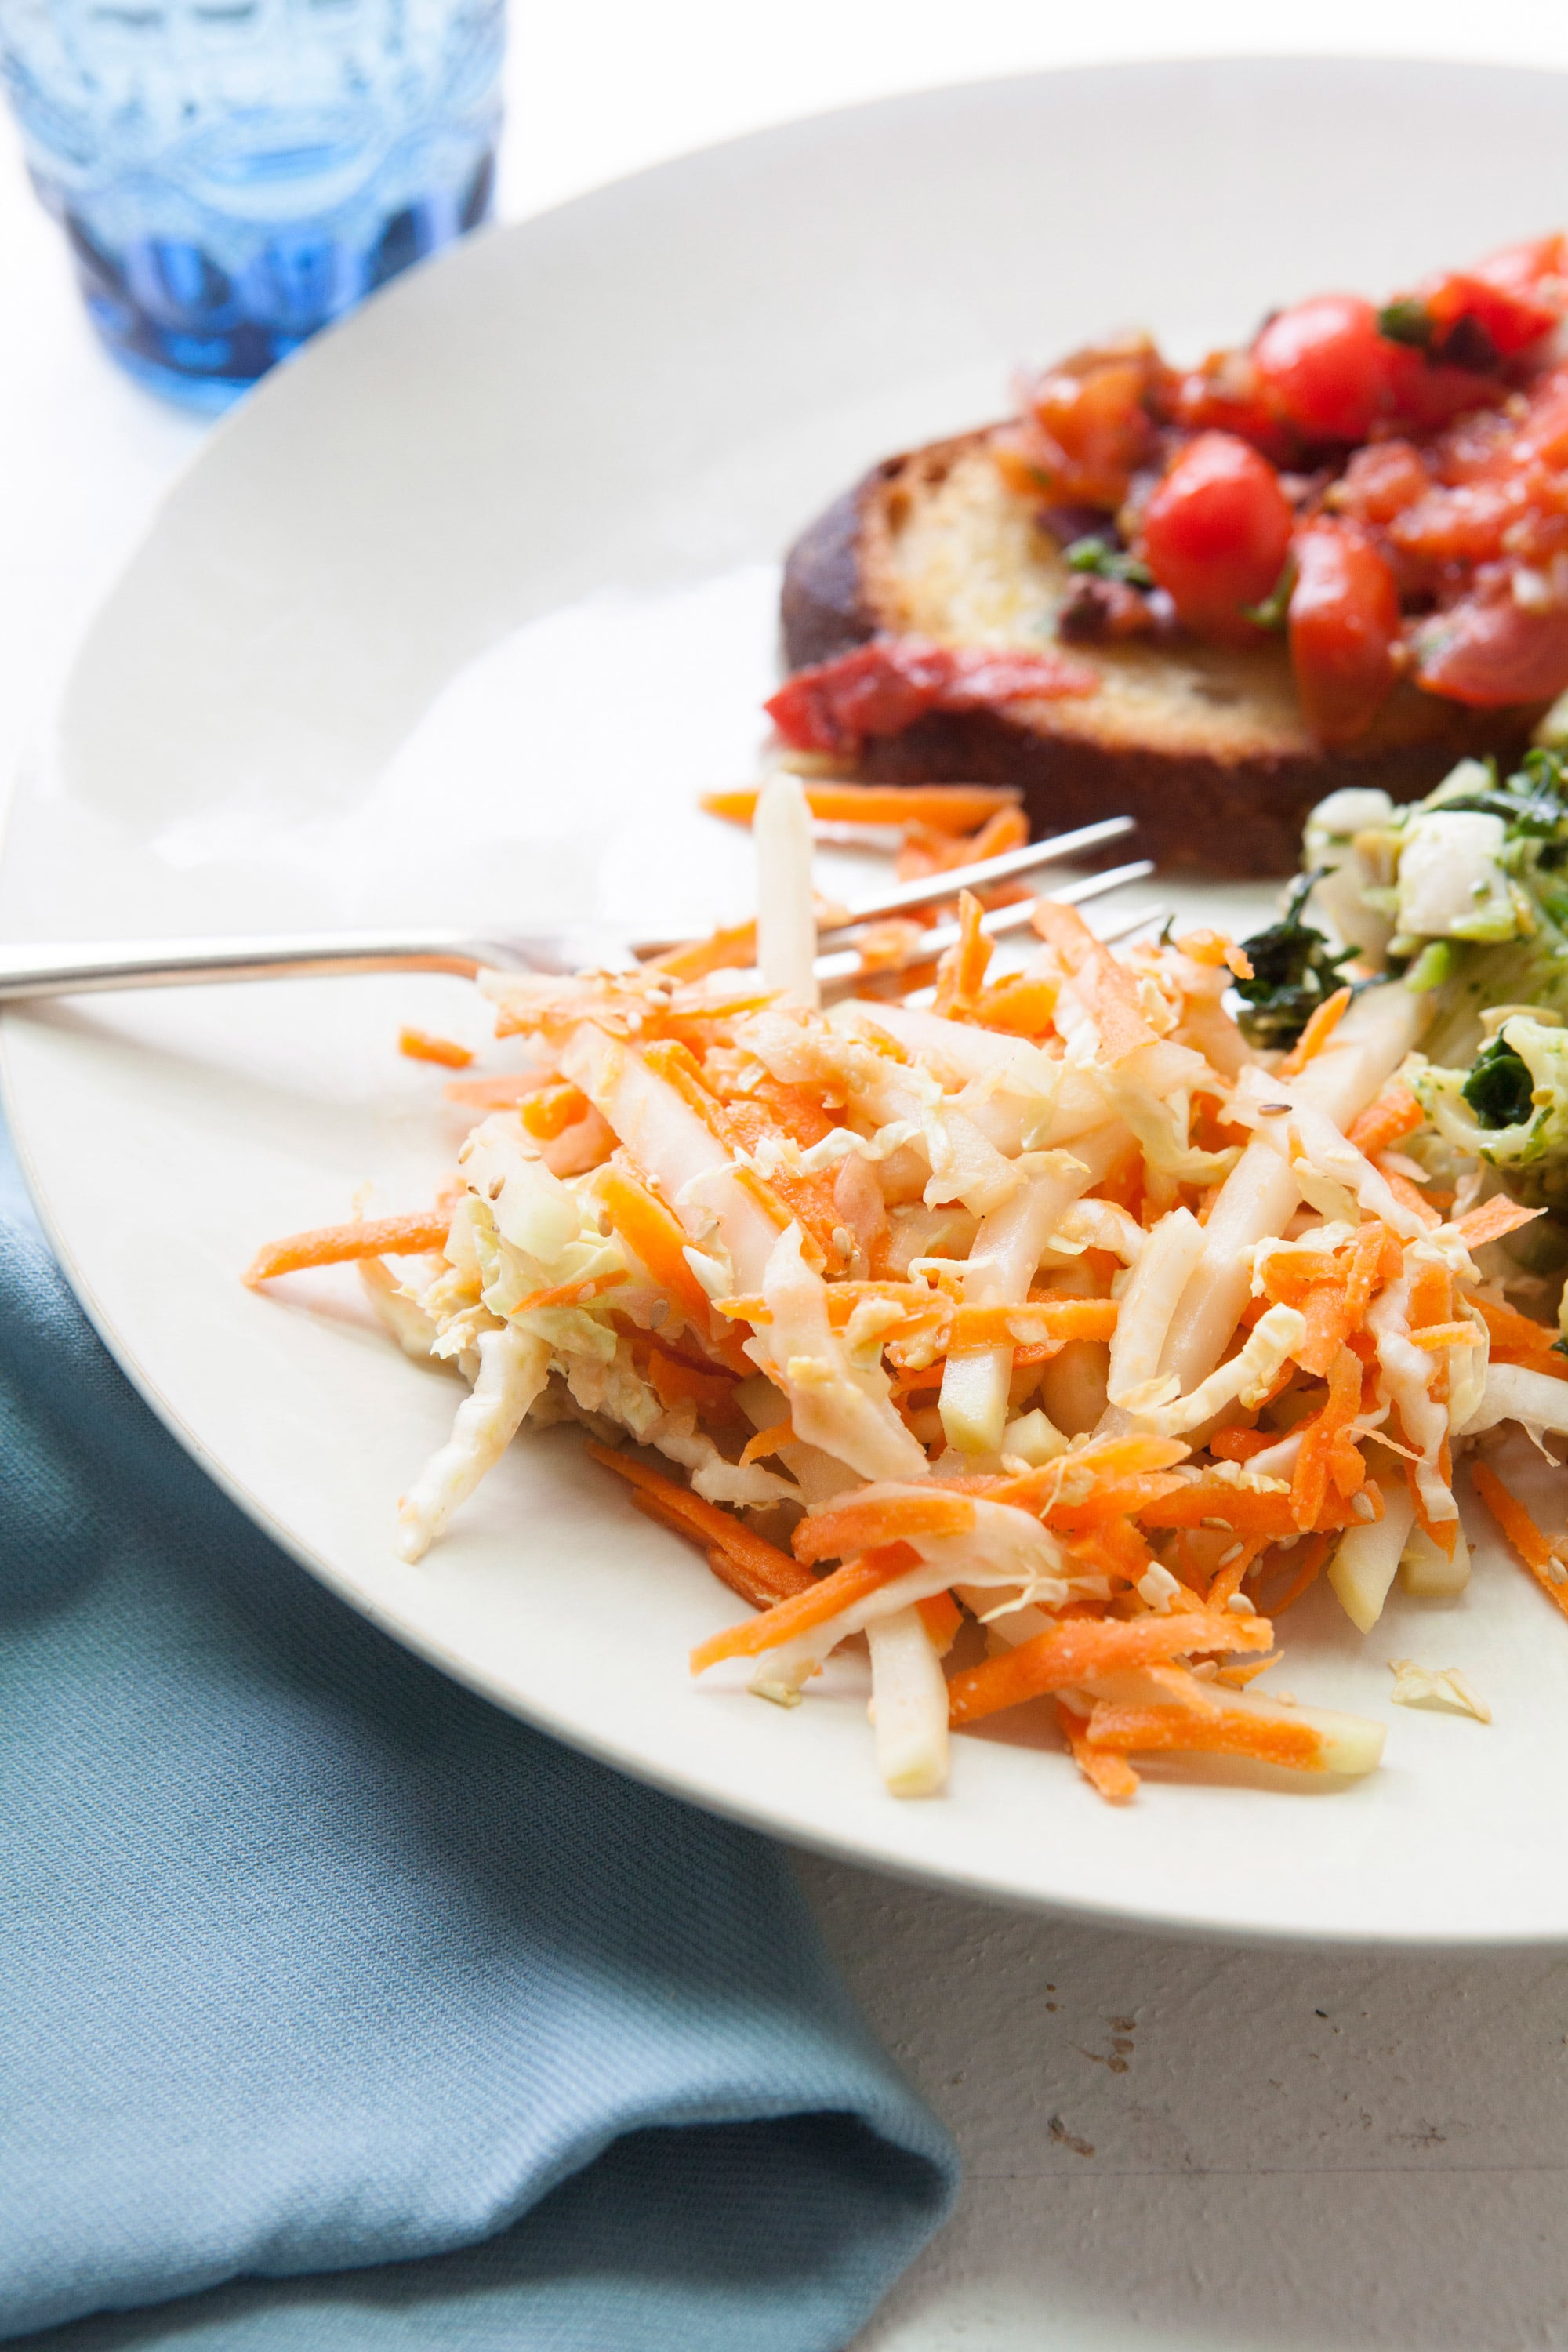 Carrot, Cabbage and Kohlrabi Slaw with Miso Dressing on white plate with fork.